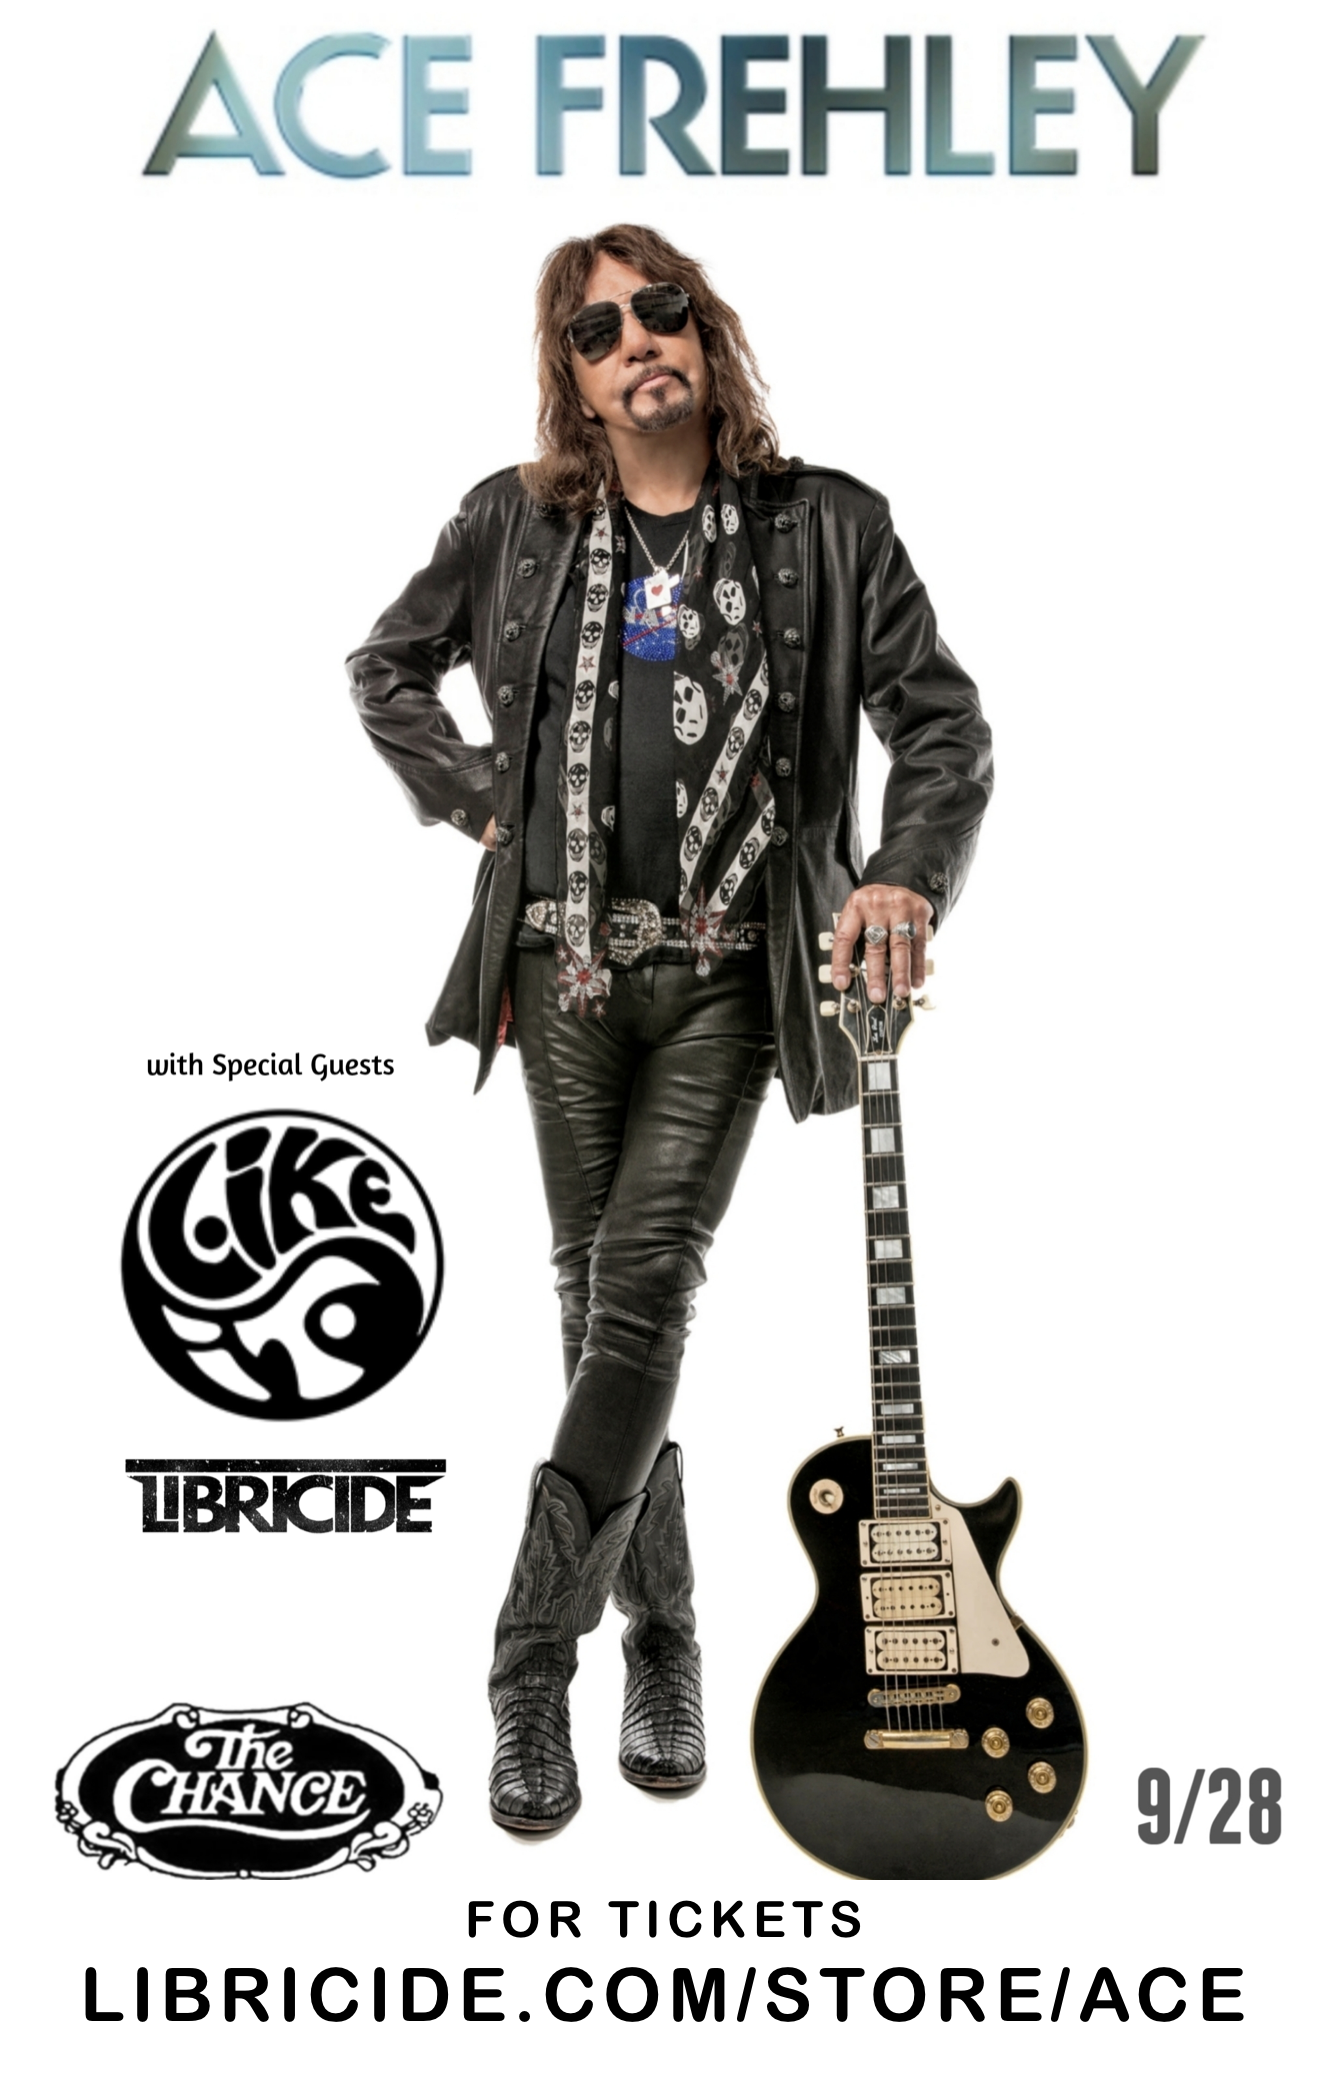 19-9-28 - Ace Frehley Libricide Flyer.png